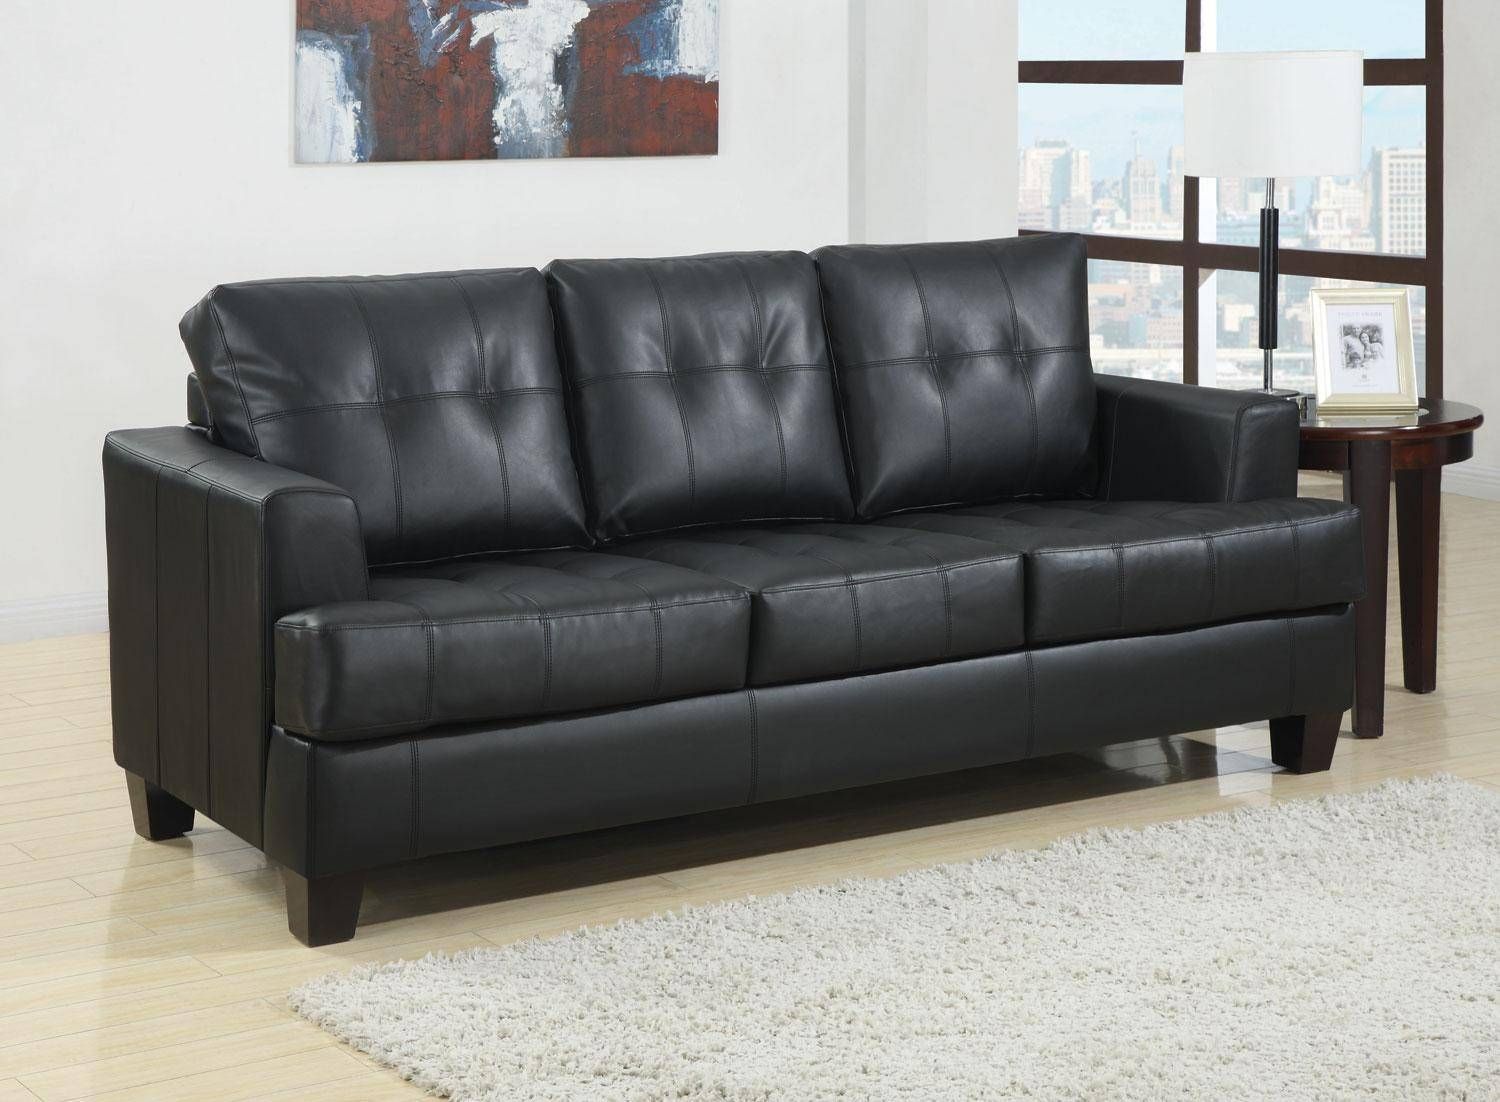 Best Leather Sleeper Sofa And Sectional Sleeper Ef32 | Leather For Black Leather Sectional Sleeper Sofas (View 20 of 30)